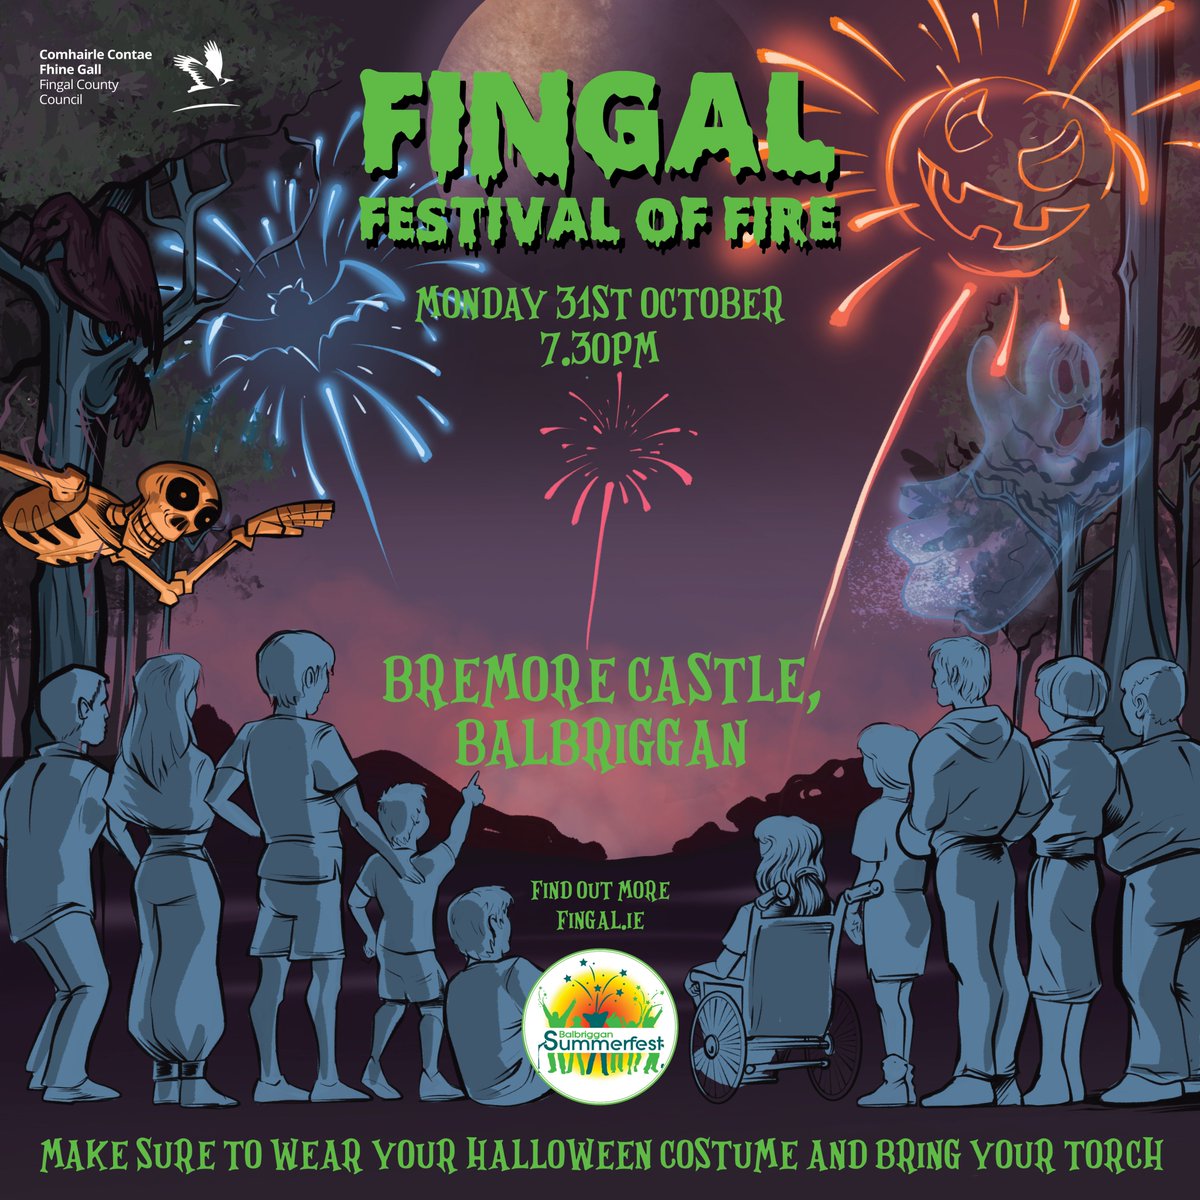 Fingal Festival of Fire at Bremore Castle in Balbriggan this Halloween, 31st of October!🎃 Join us for a spooky disco starting from 7pm followed by a magical firework display at 7:30pm🎆 #FingalFestivalOfFire #Halloween #EventsInFingal @LoveFingalDub @visitdublin @Fingalcoco